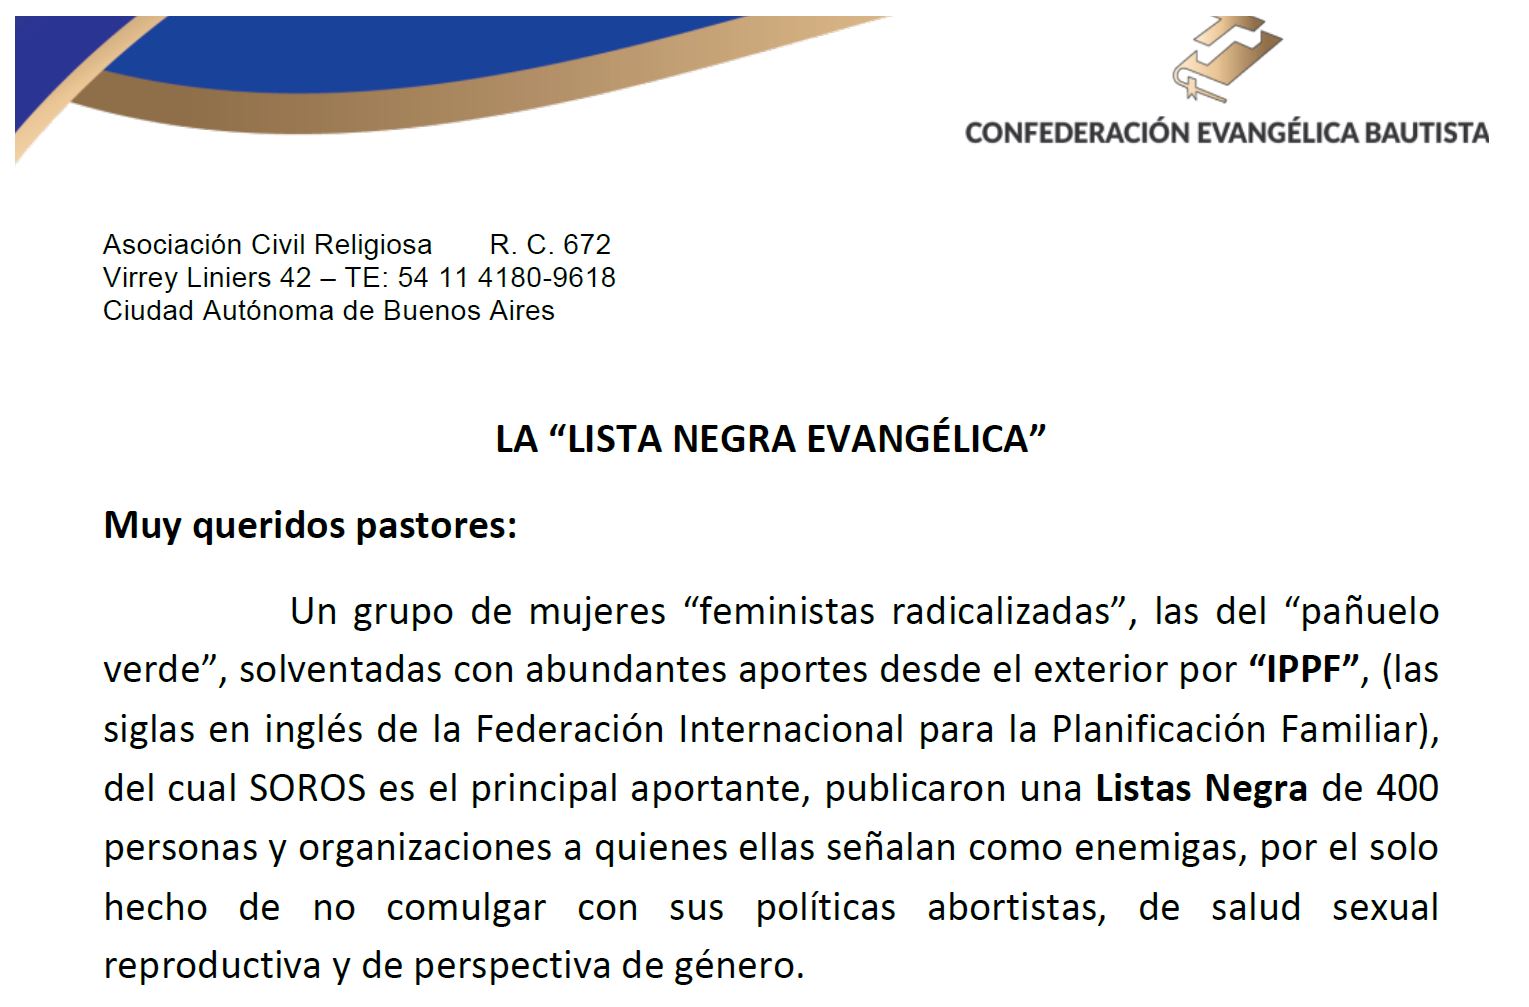 Controversial “anti-rights black list” in Argentina includes pastors, churches and evangelical organisations